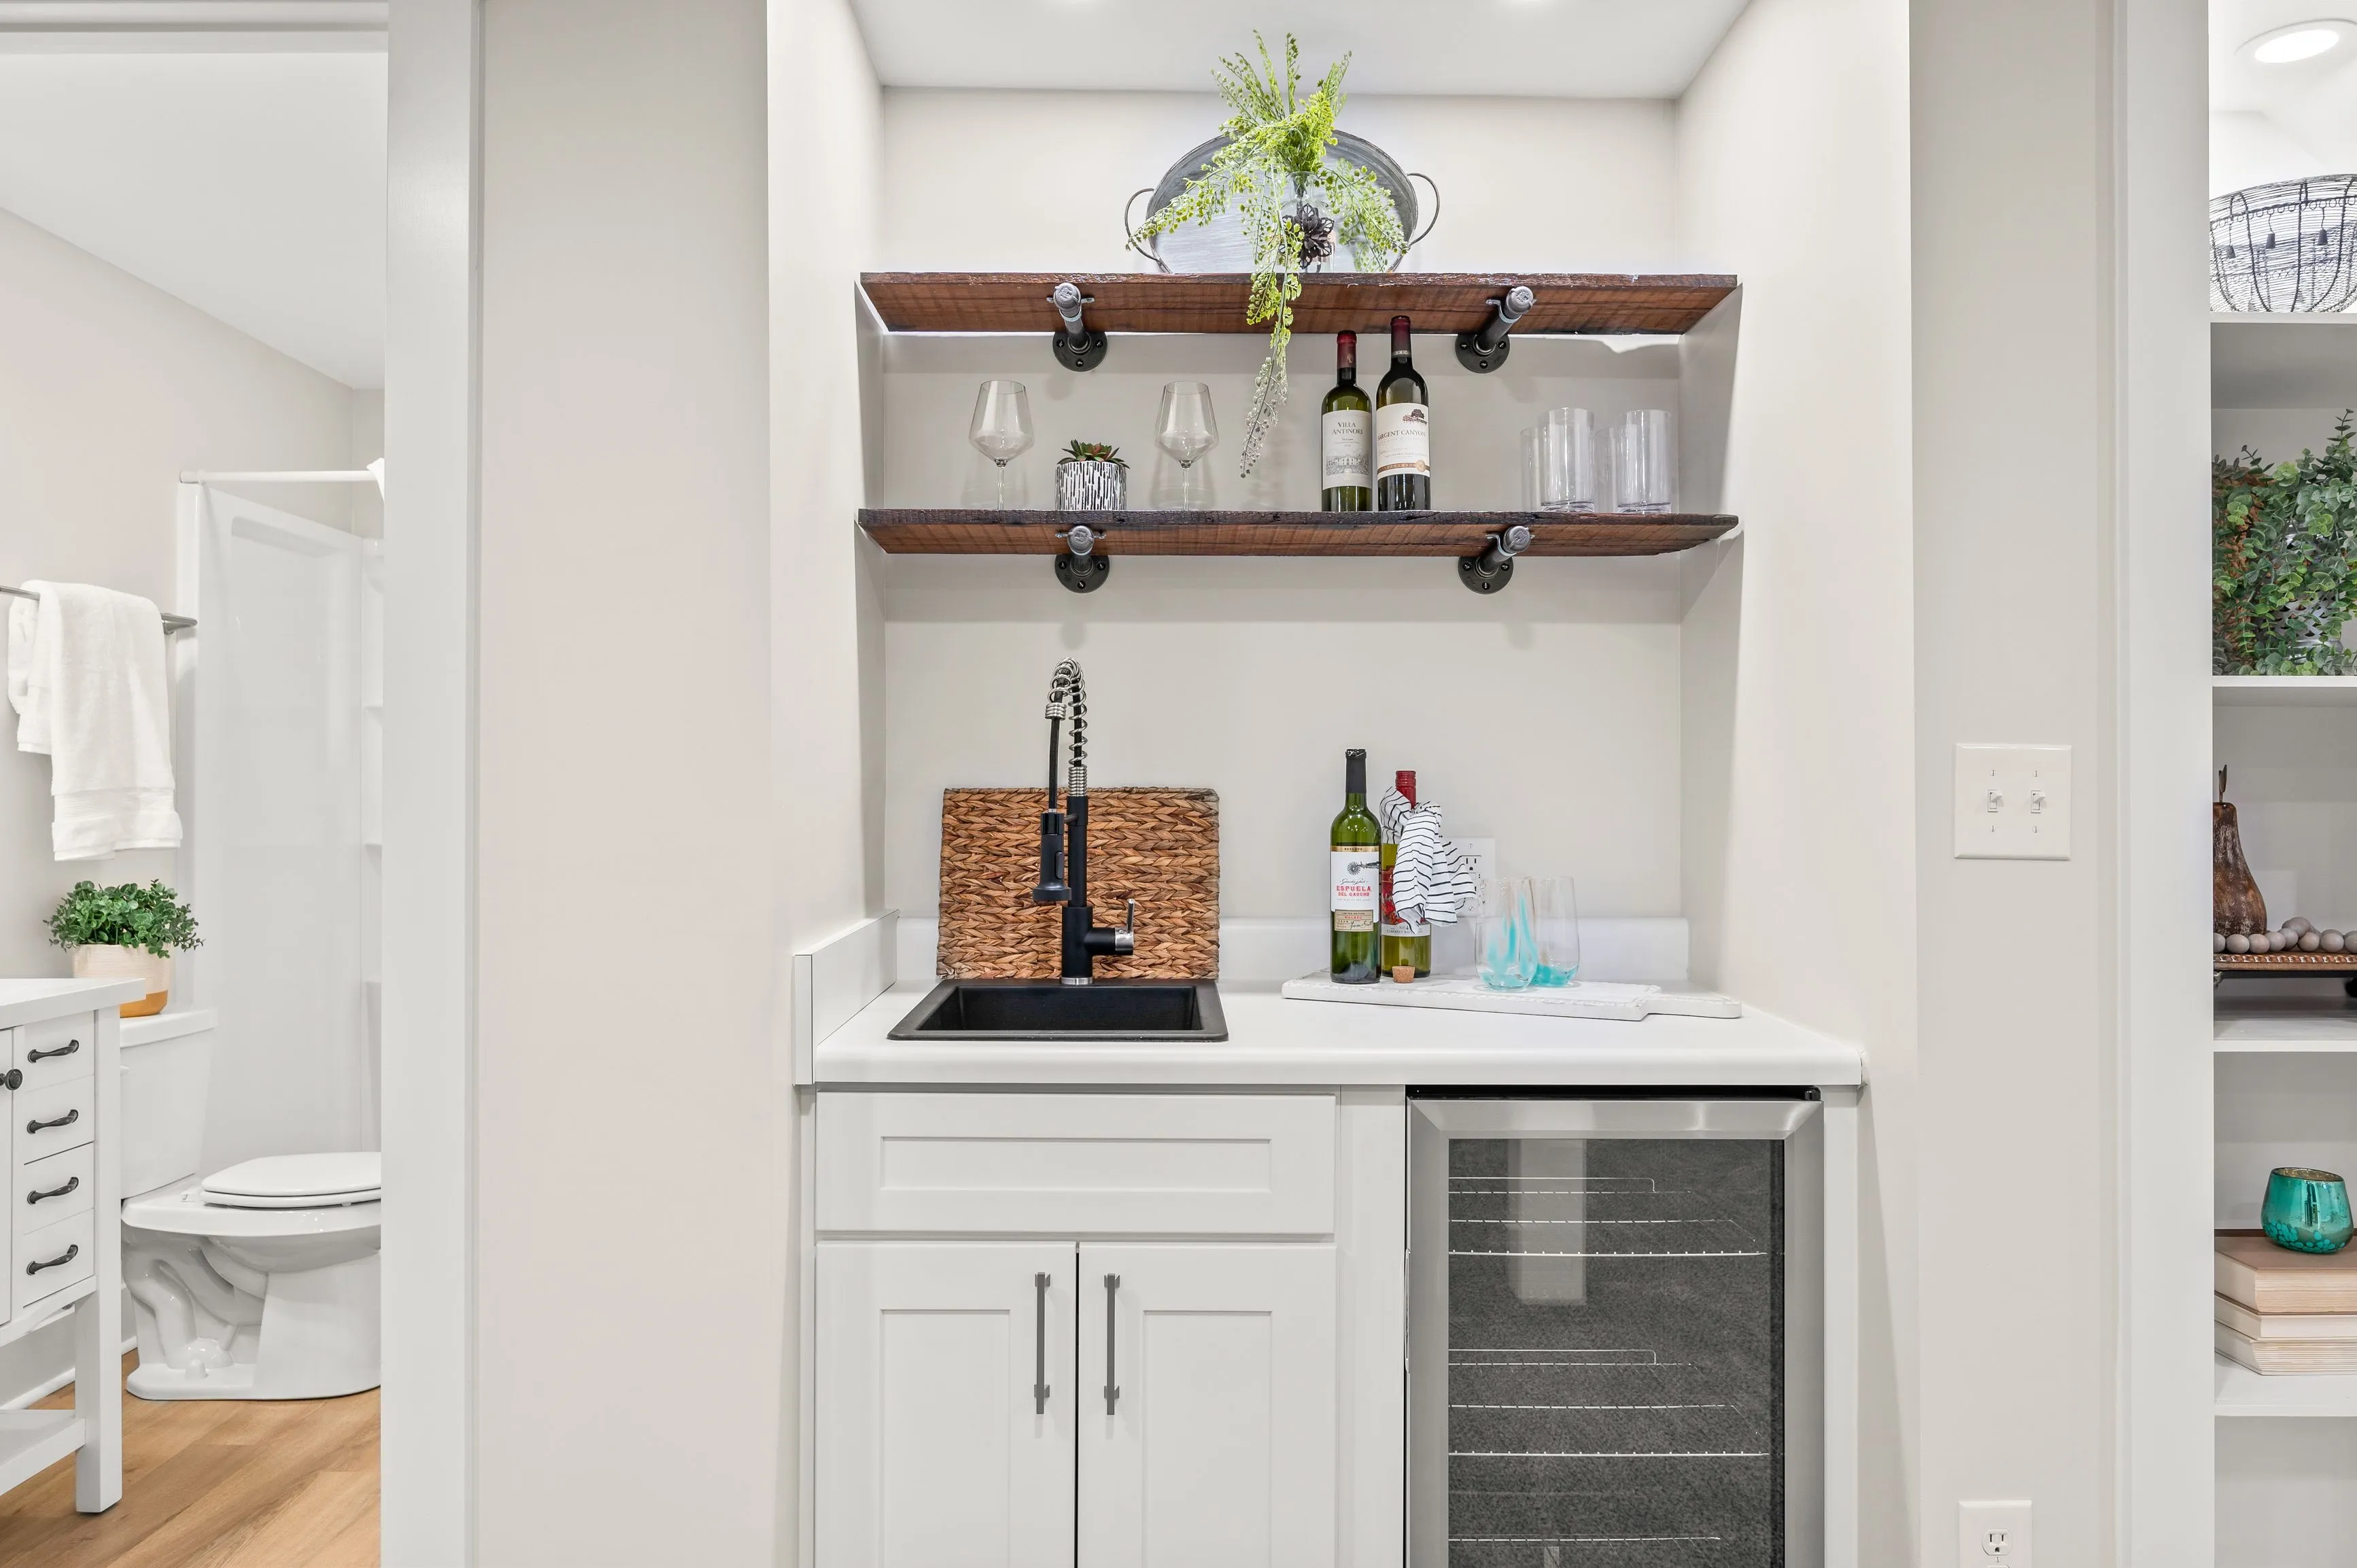 Modern kitchenette with white cabinets, stainless steel mini-fridge, and open wooden shelves with wine glasses and decor.